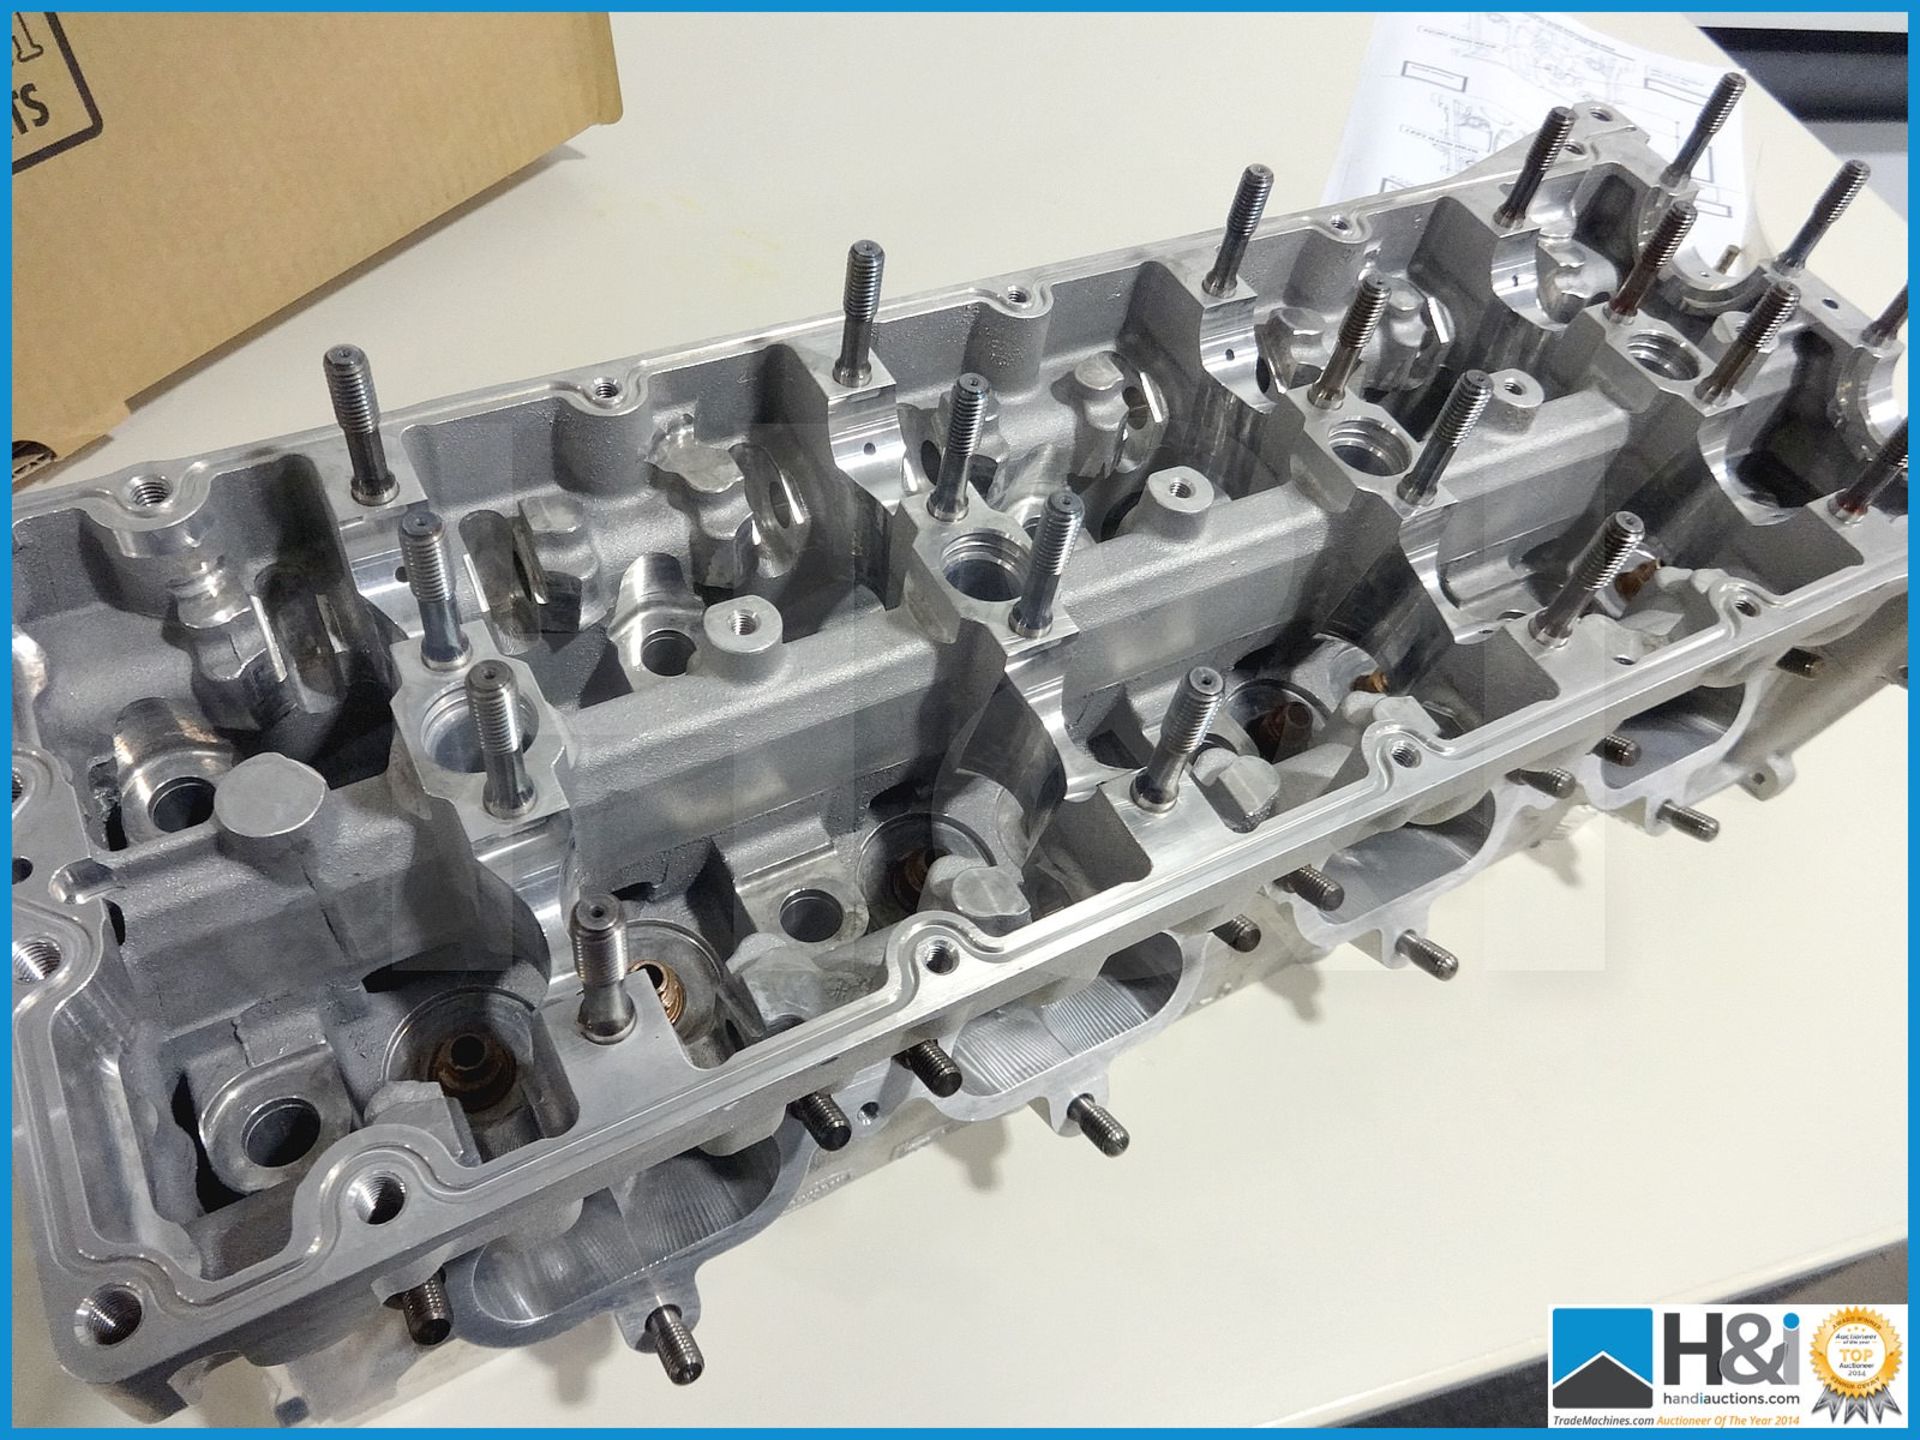 1 off Cosworth XG RH cylinder head assembly - shallow. Valued at over GBP 10,000. MC: XG8640 CILN: 1 - Image 5 of 7